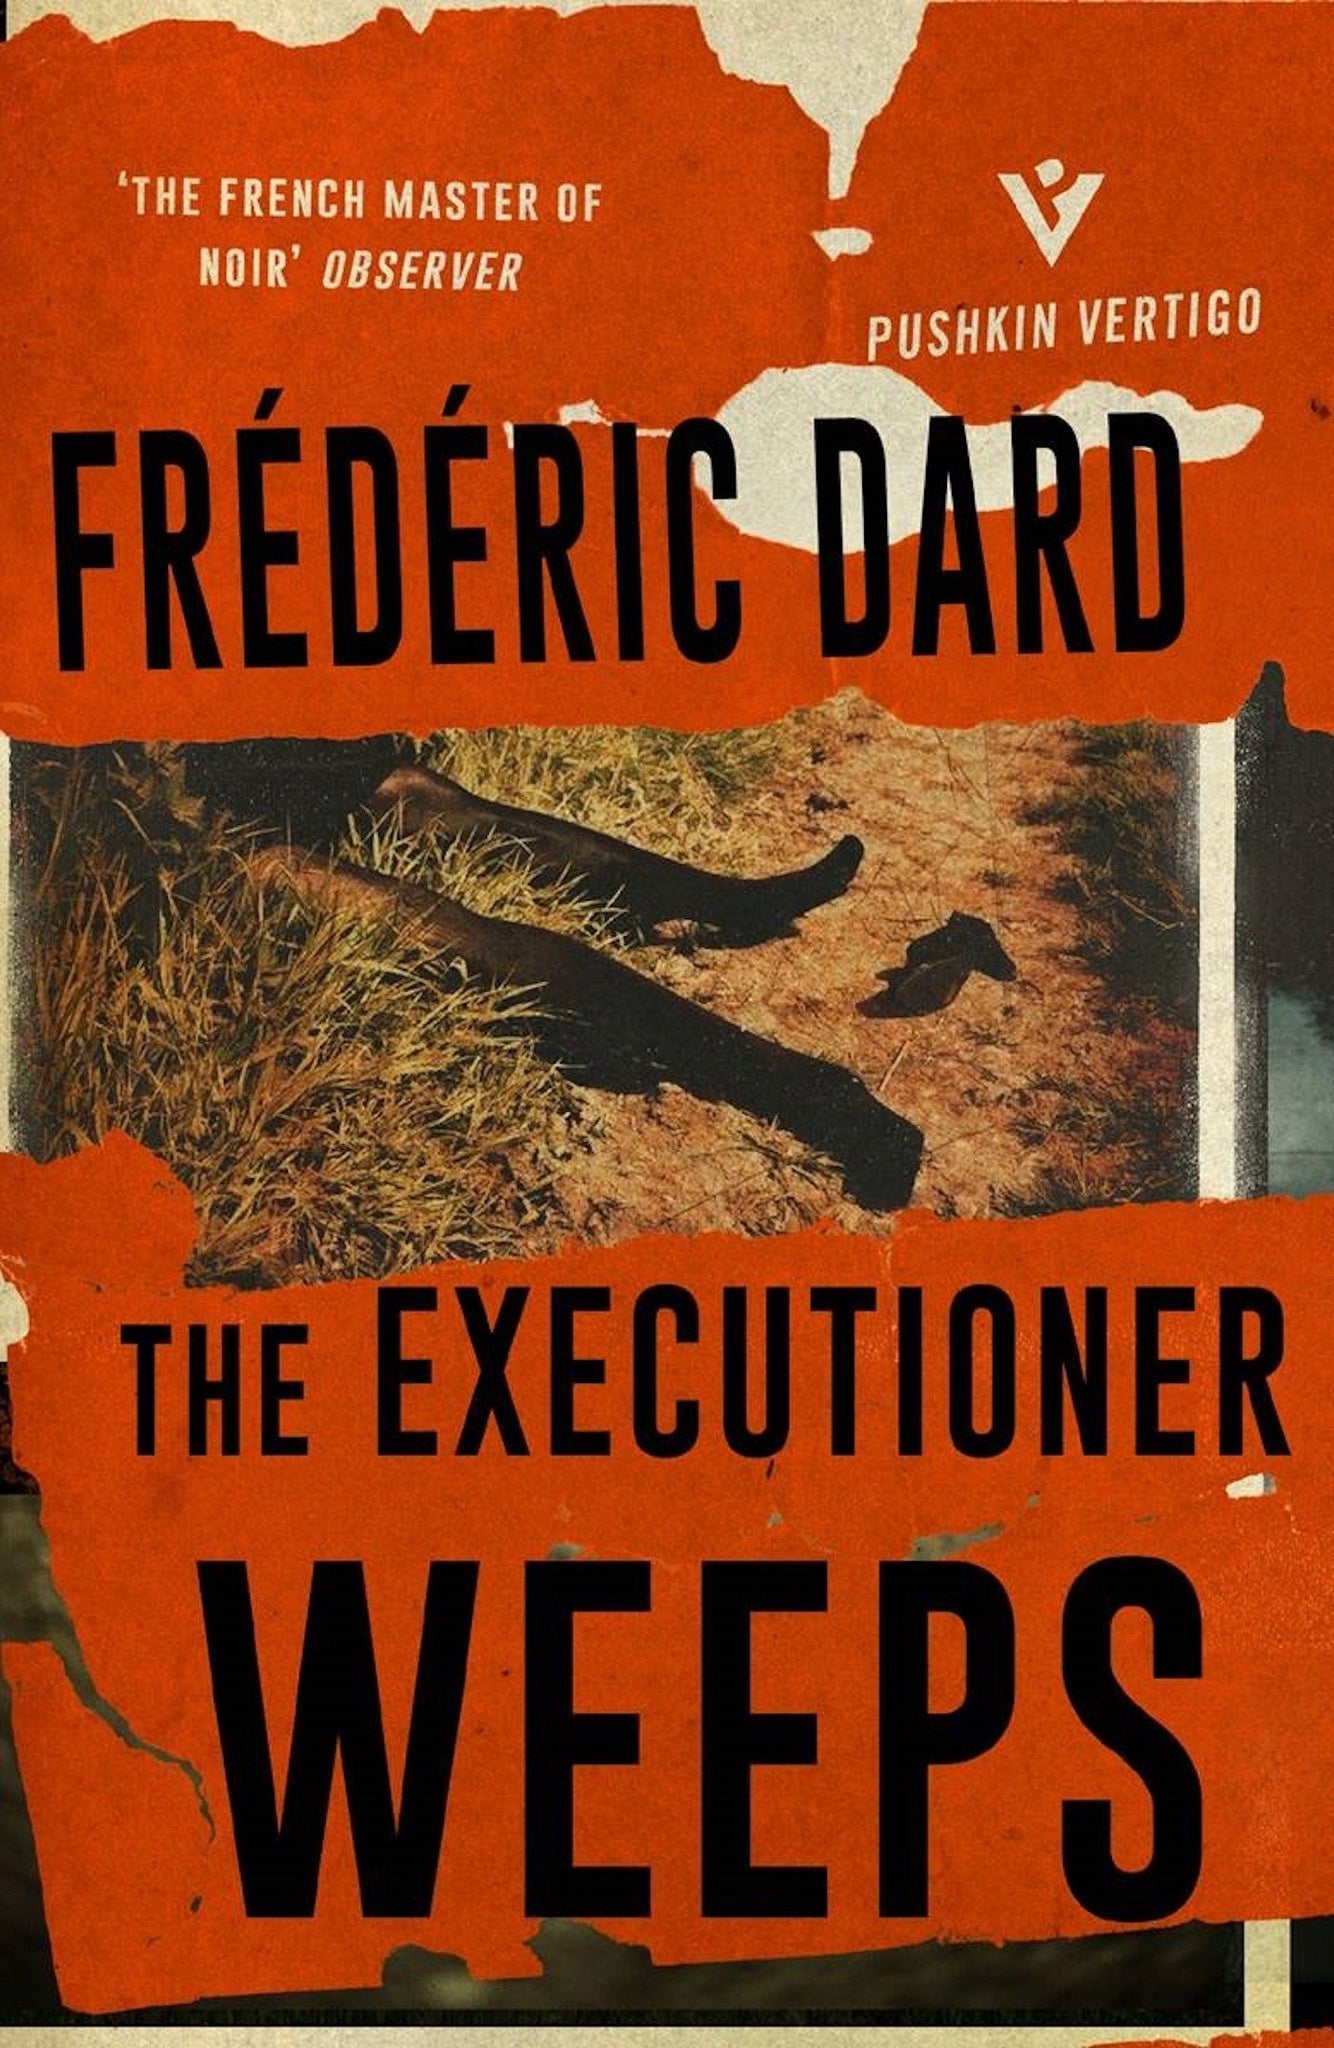 The Executioner Weeps